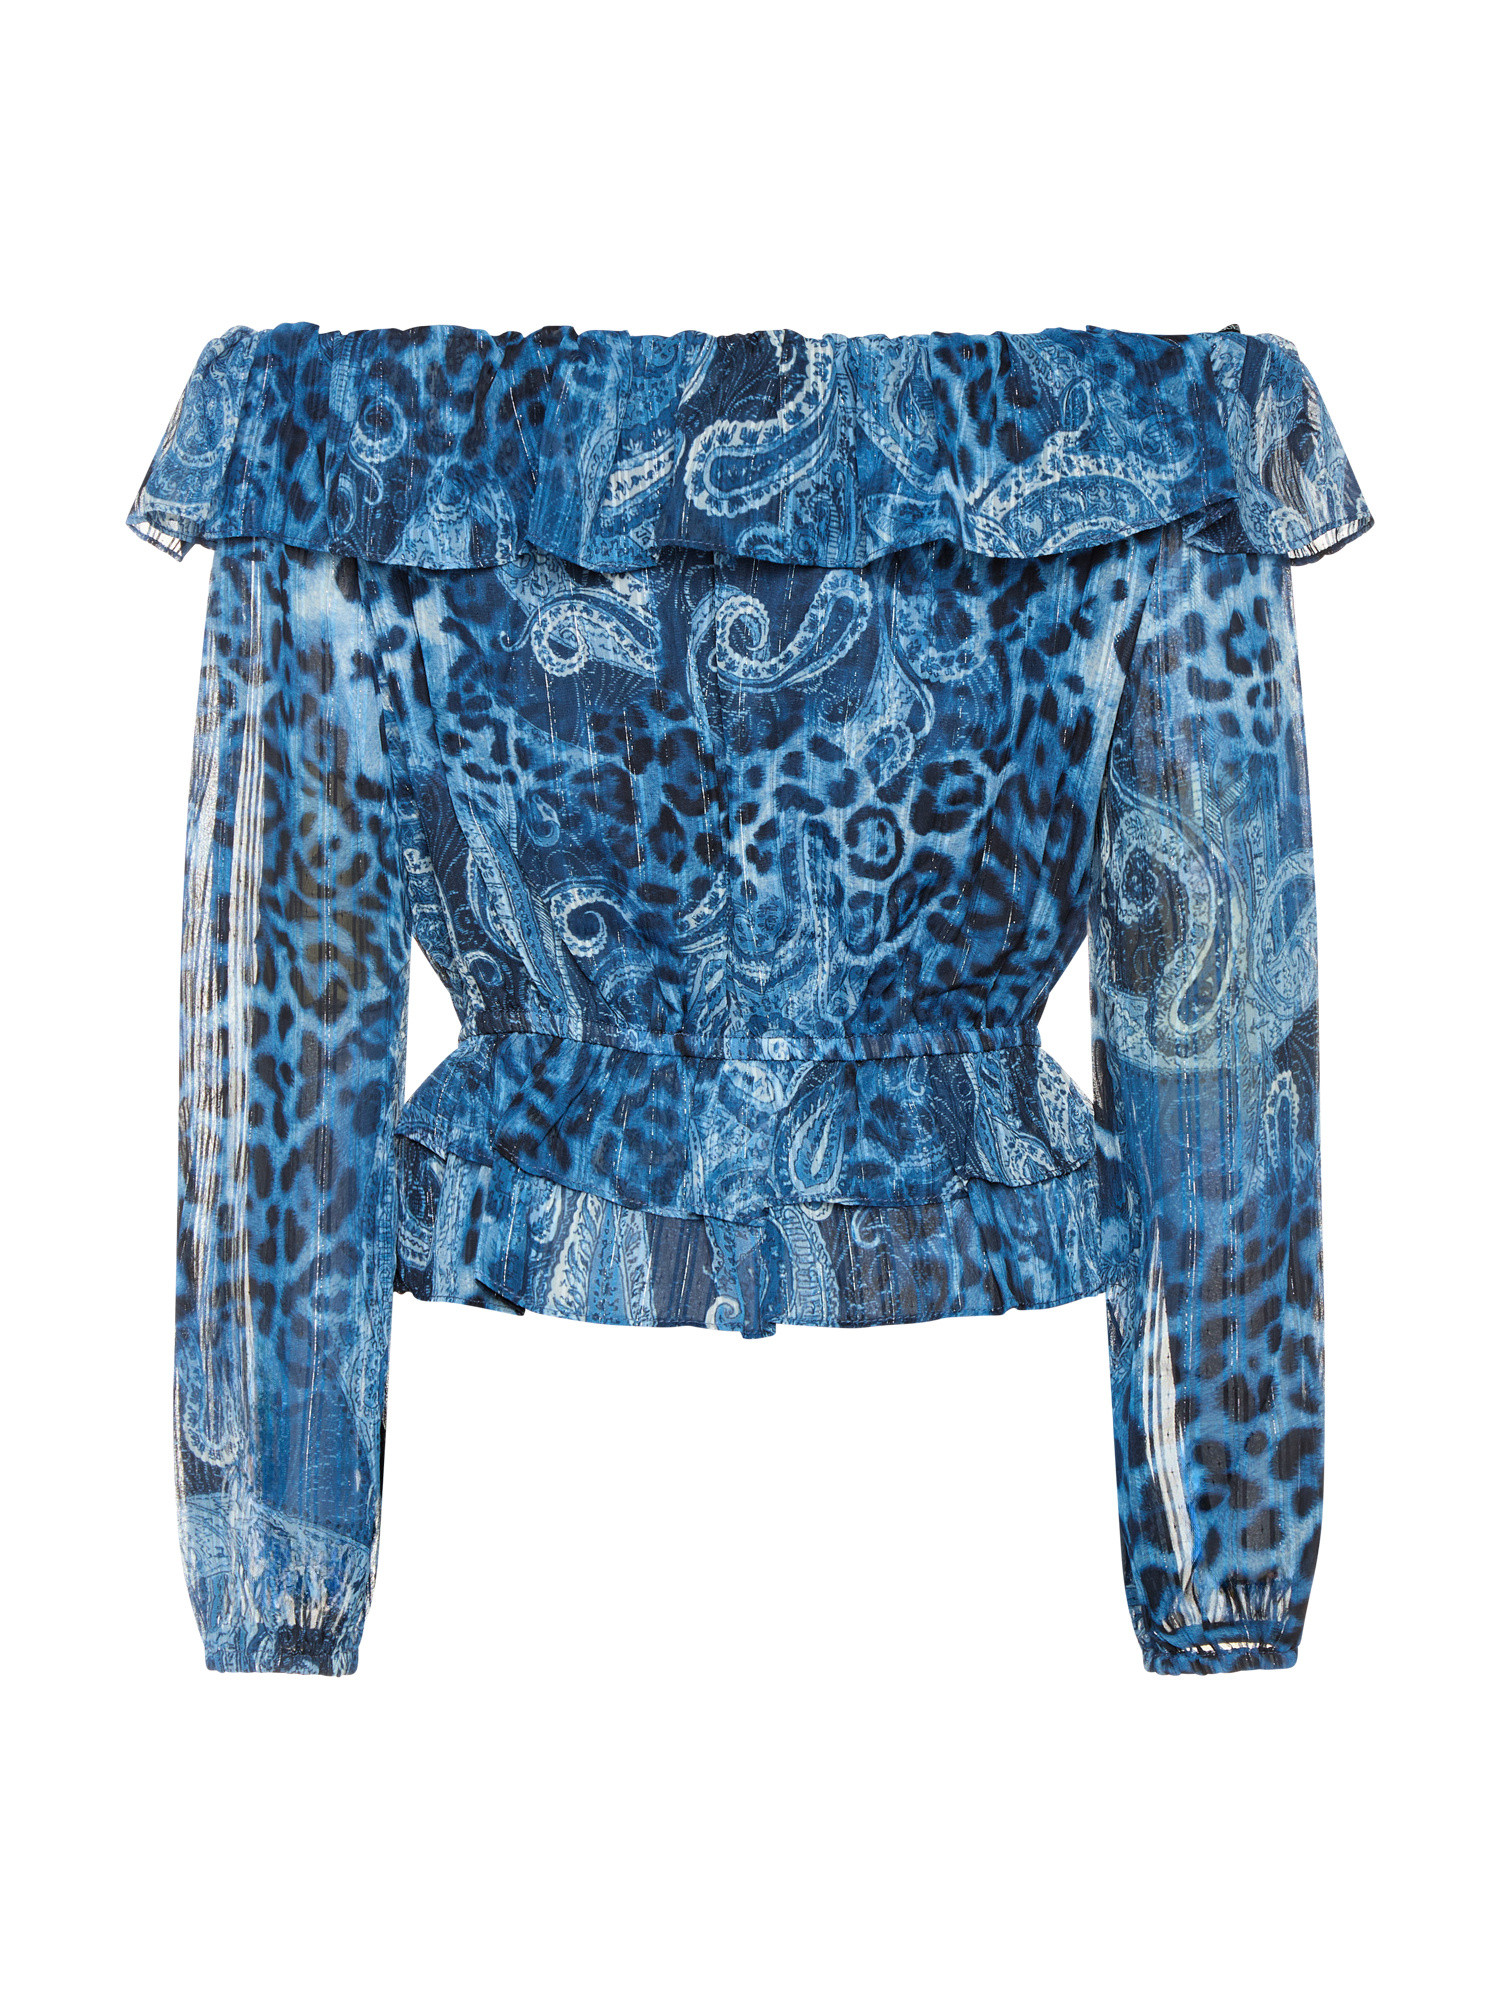 Guess - Paisley print blouse, Blue Dark, large image number 1